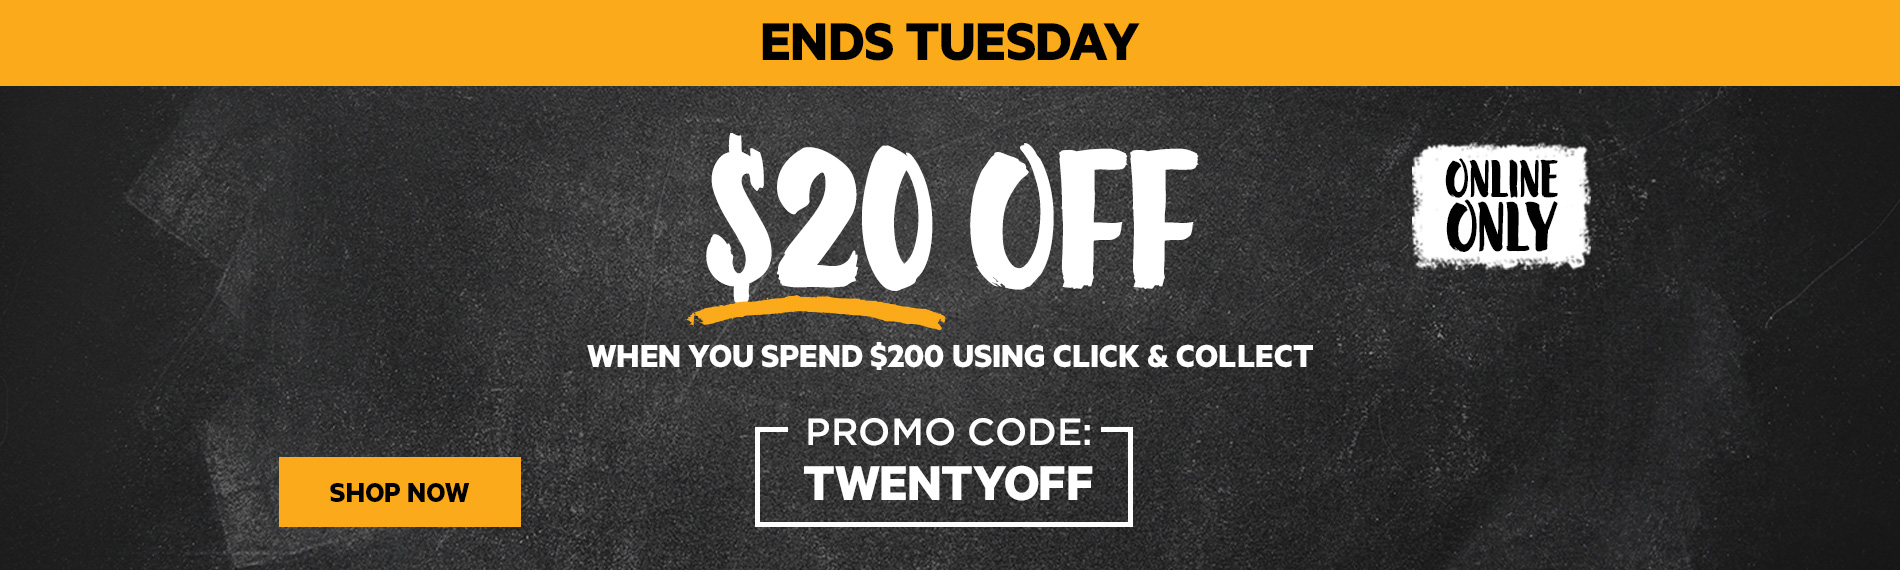 Get extra $20 OFF $200+ using Click & Collect with discount code